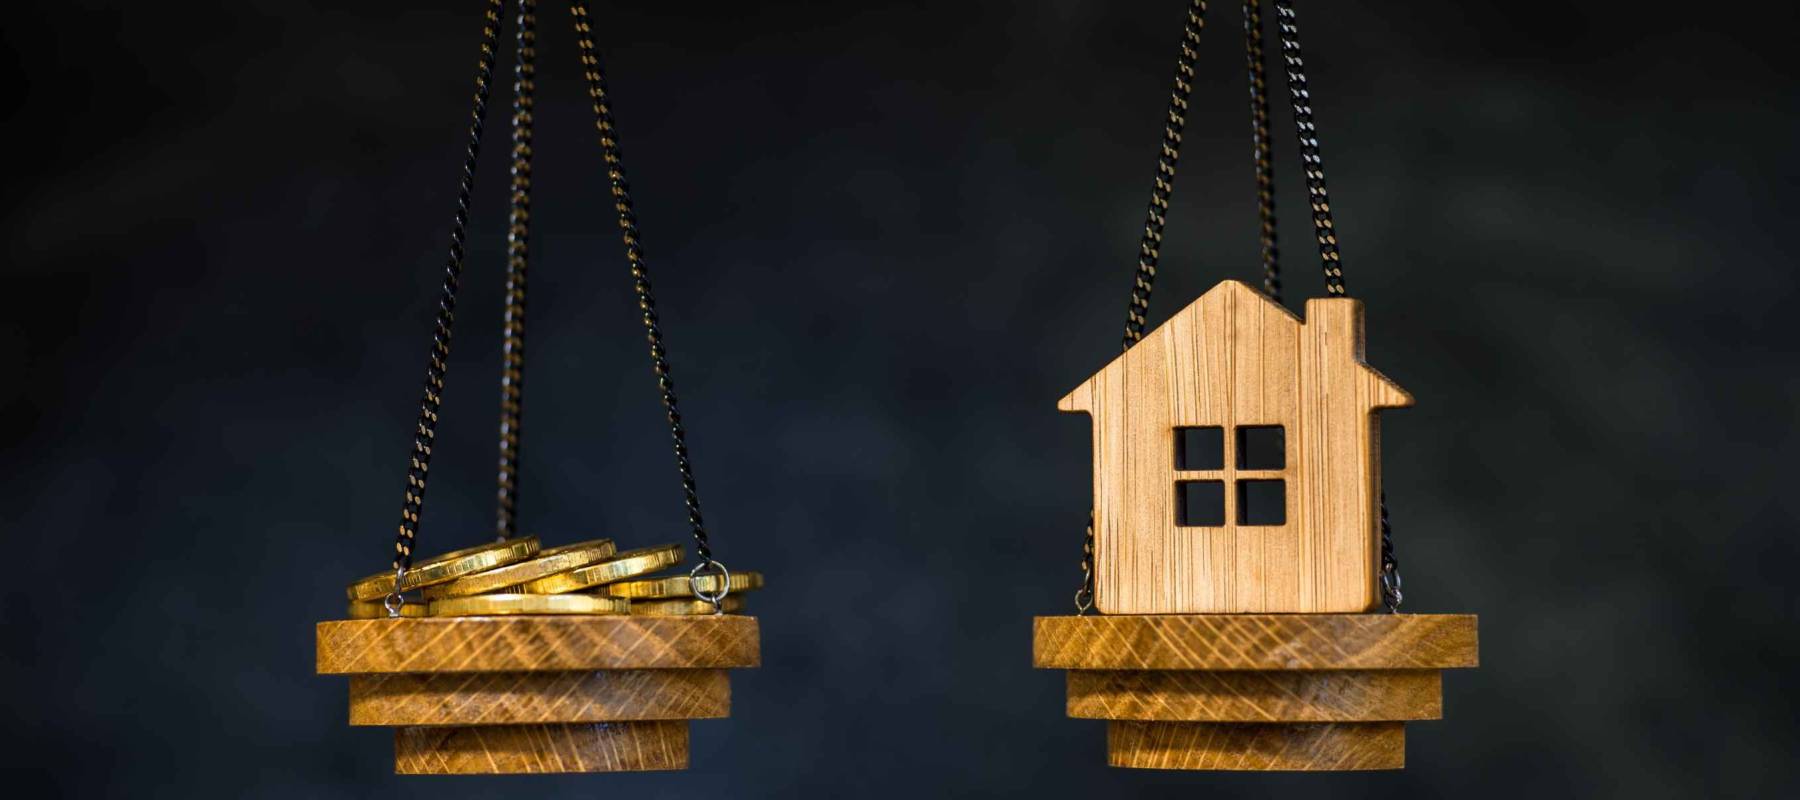 The scales with the coins and the home of the imitation of bamboo. The concept of purchasing housing, credit, and quotes on the real estate market.